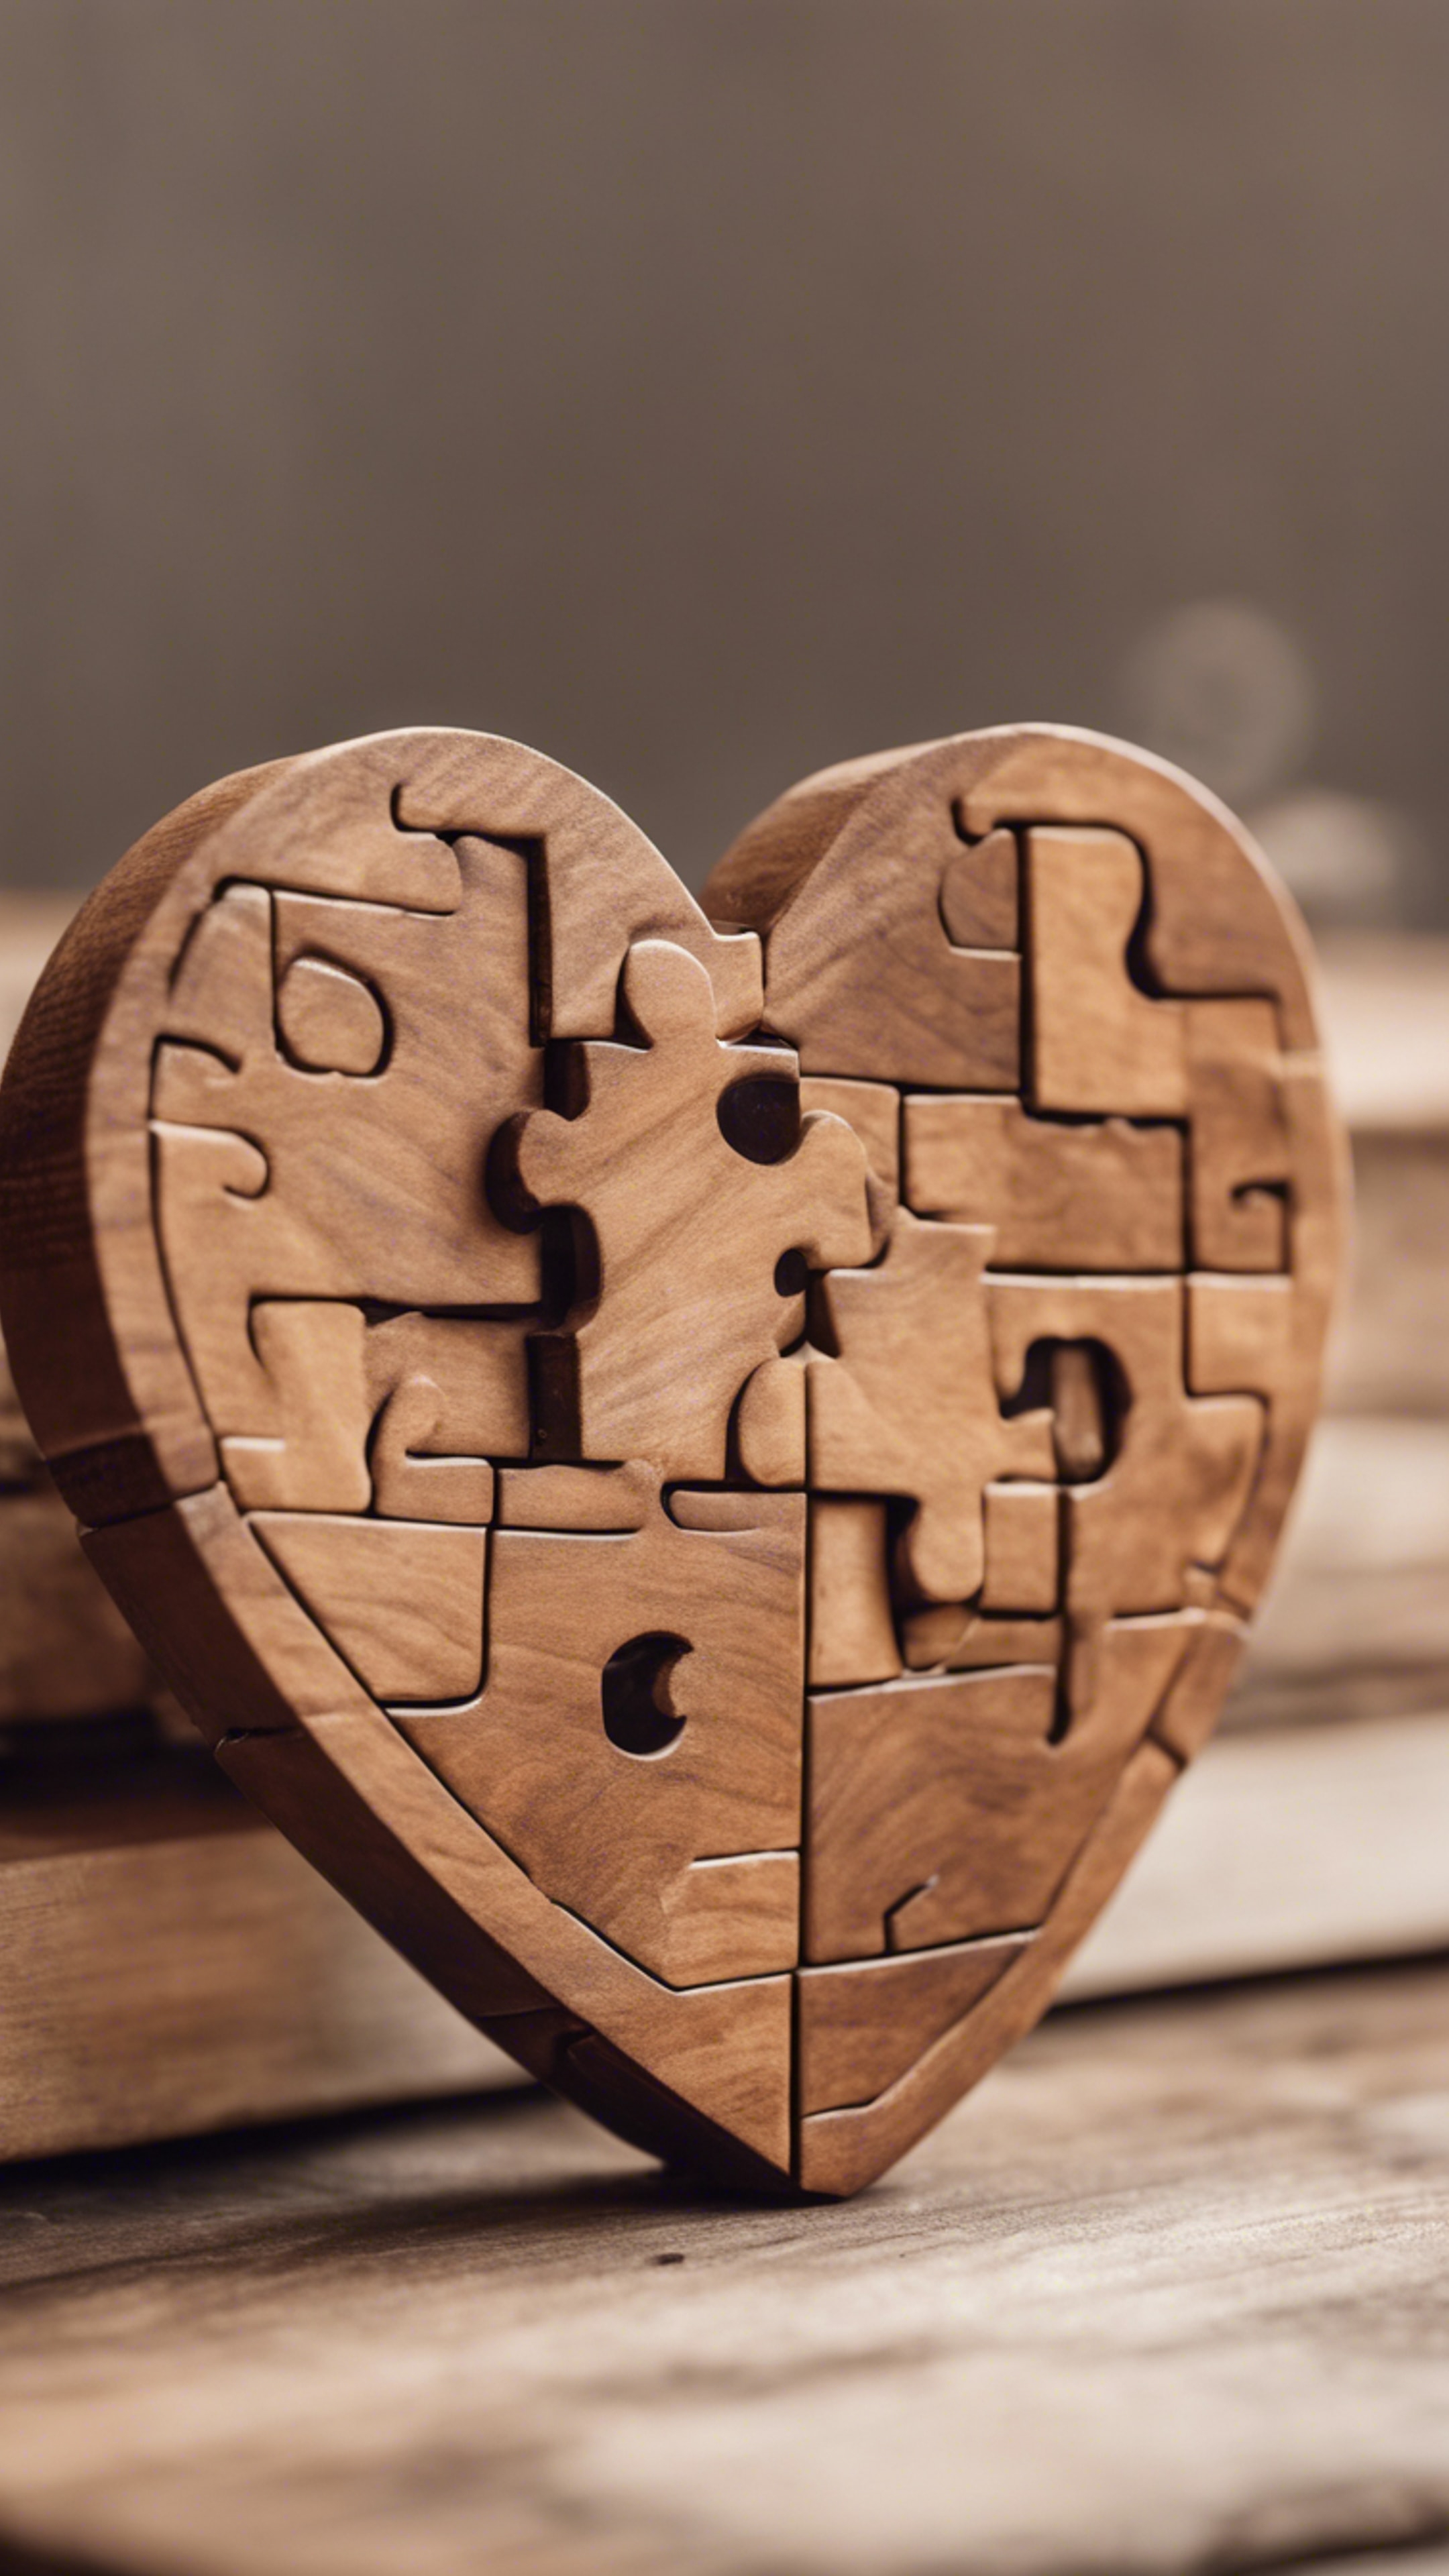 A brown wooden heart-shaped puzzle piece fitting perfectly into its place.壁紙[5dddface261c4e859b18]